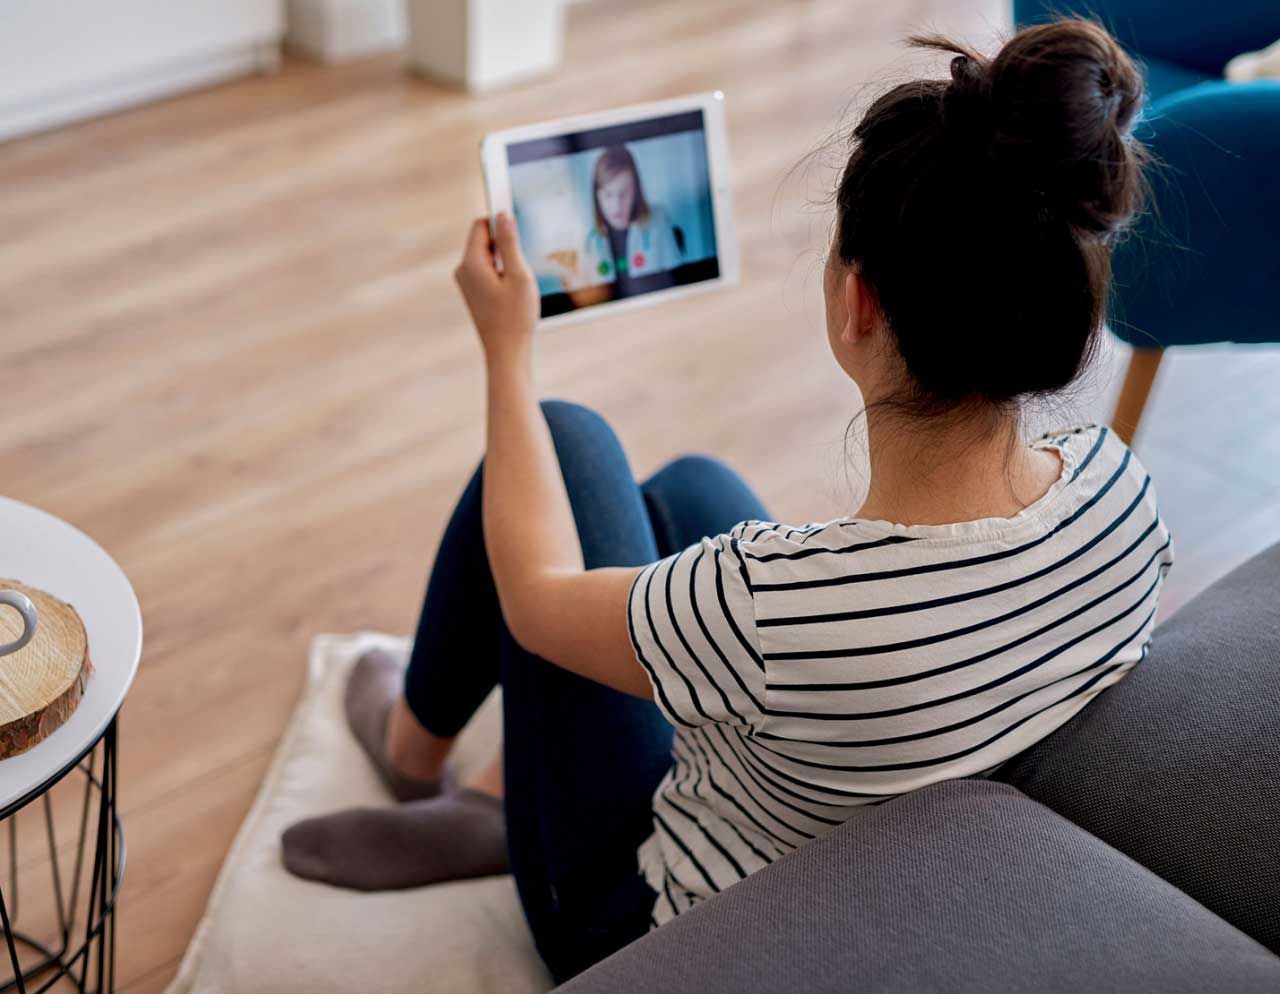 Limited English Proficiency Patients Face Challenges with Telehealth Visits